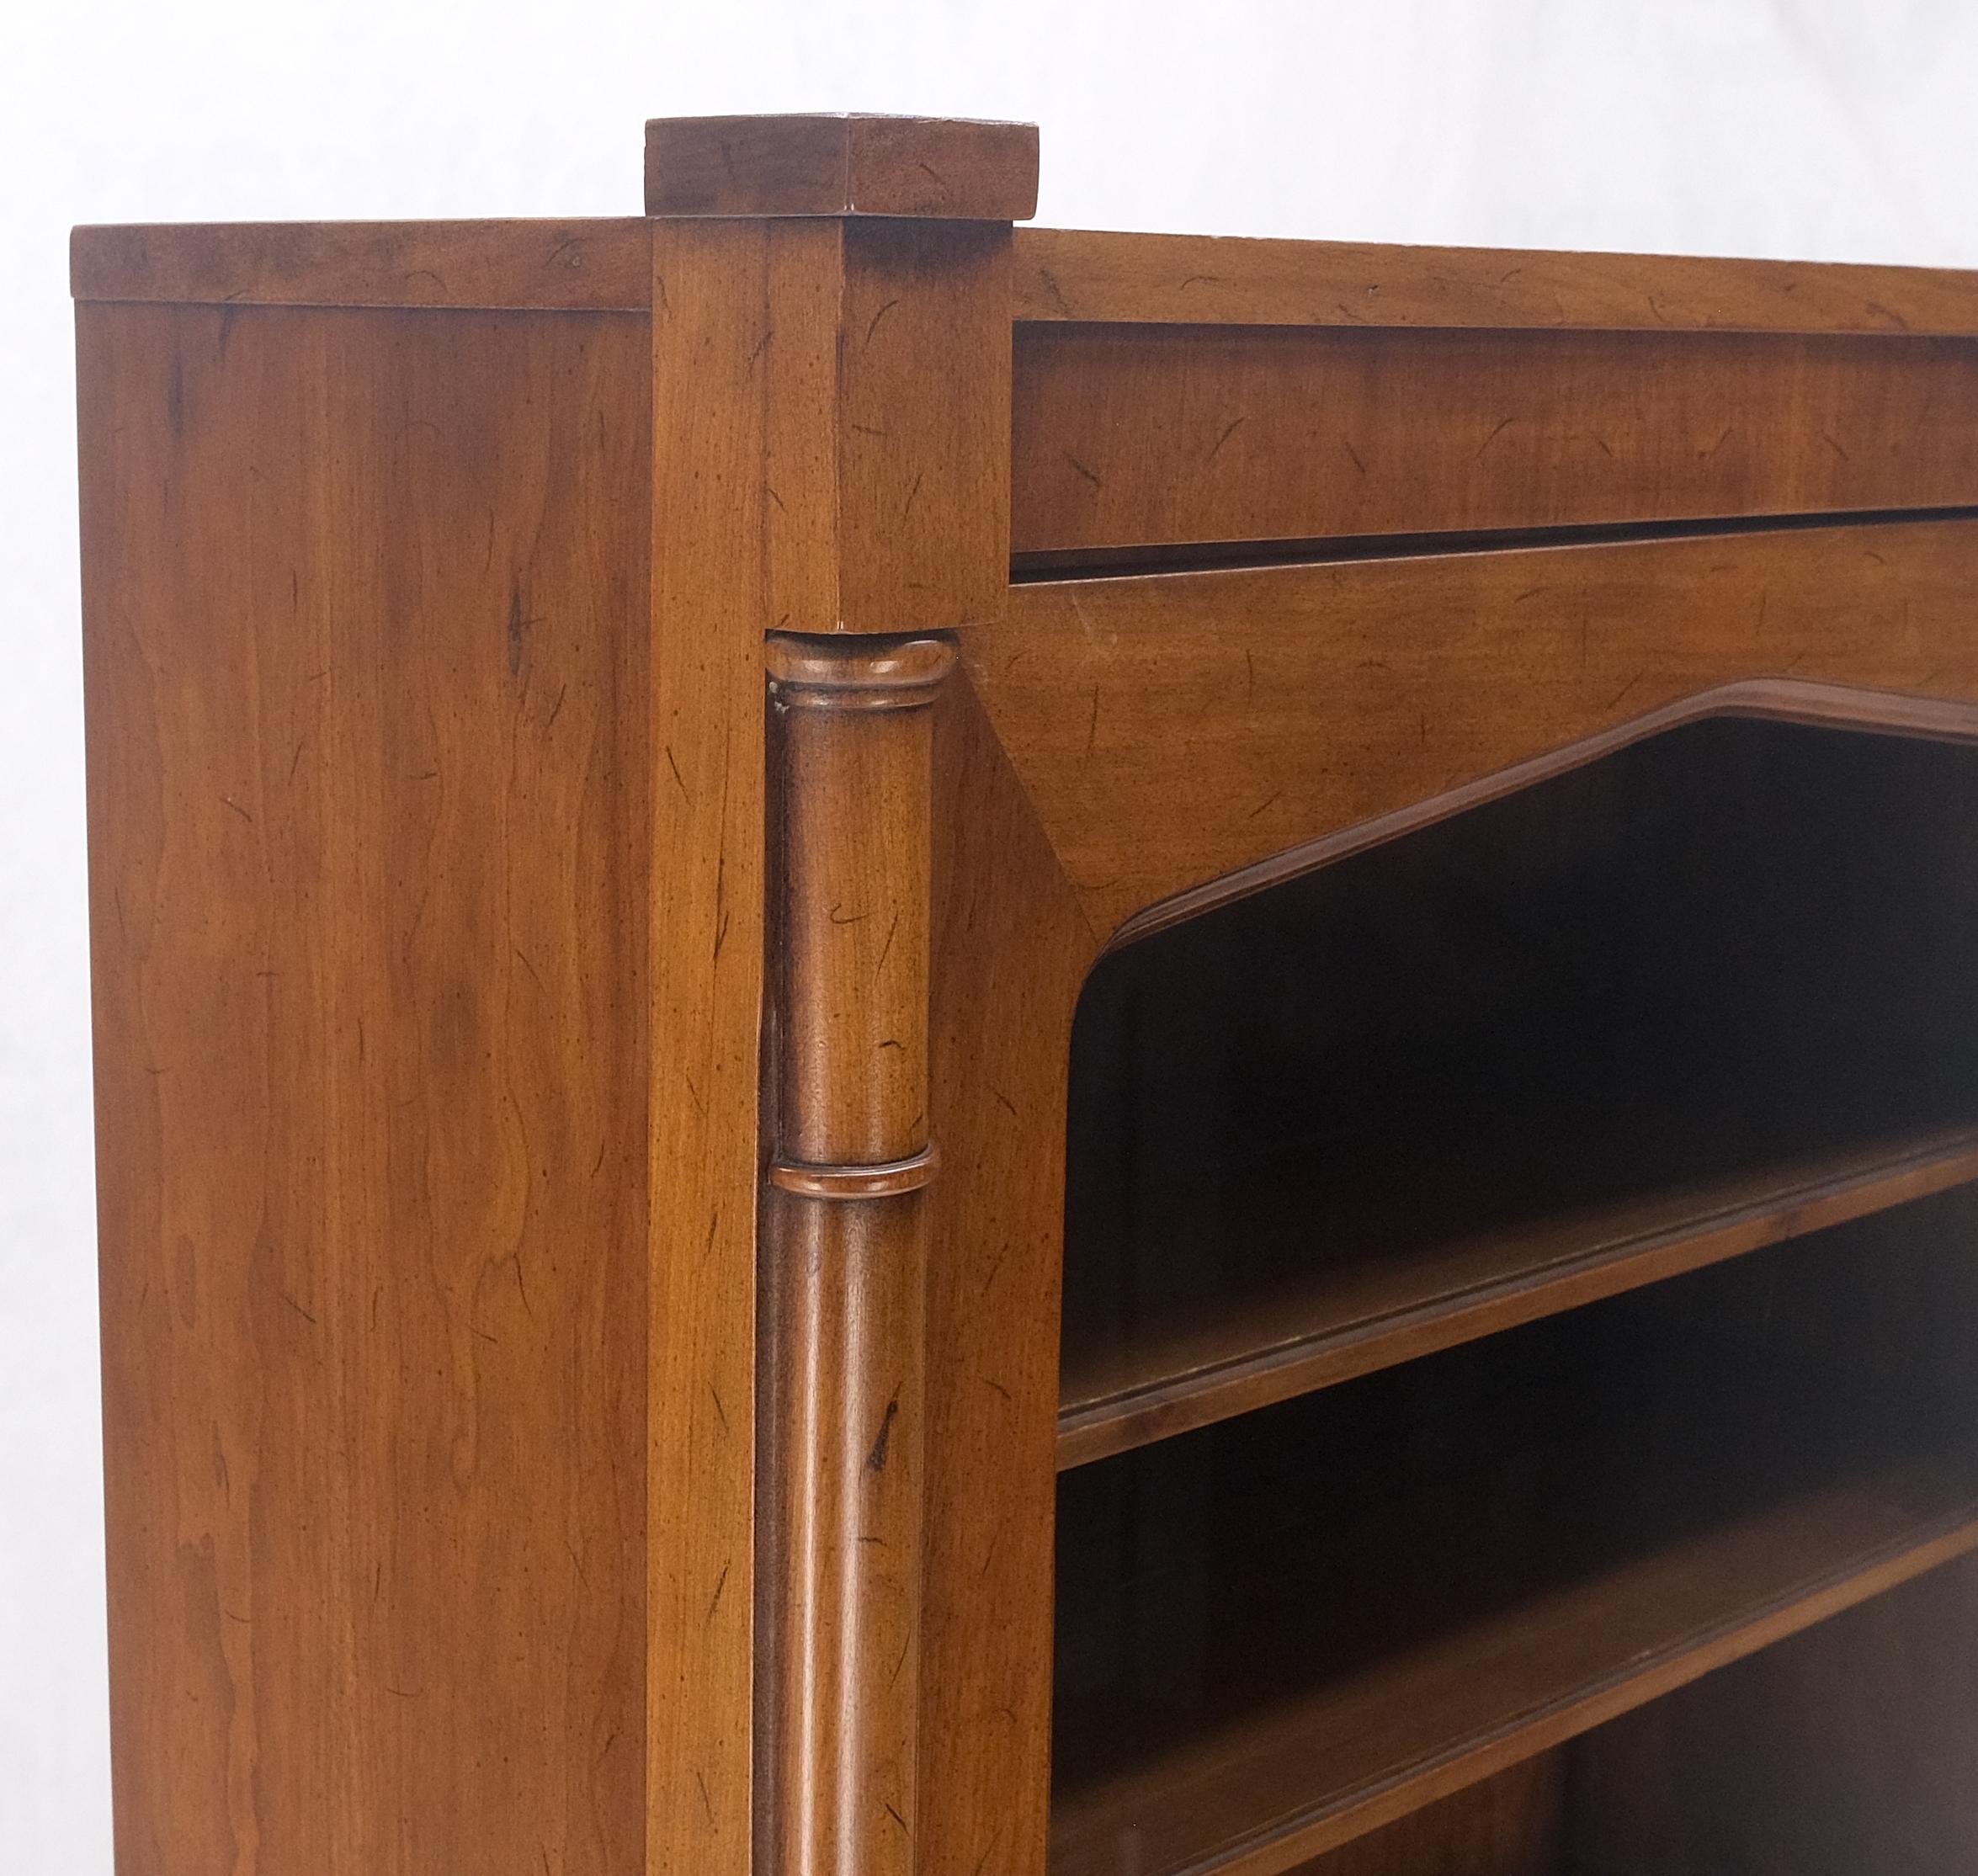 Lacquered Single Glass Door Solid Cherry Tall Bookcase Cupboard Bottom Compartment MINT! For Sale